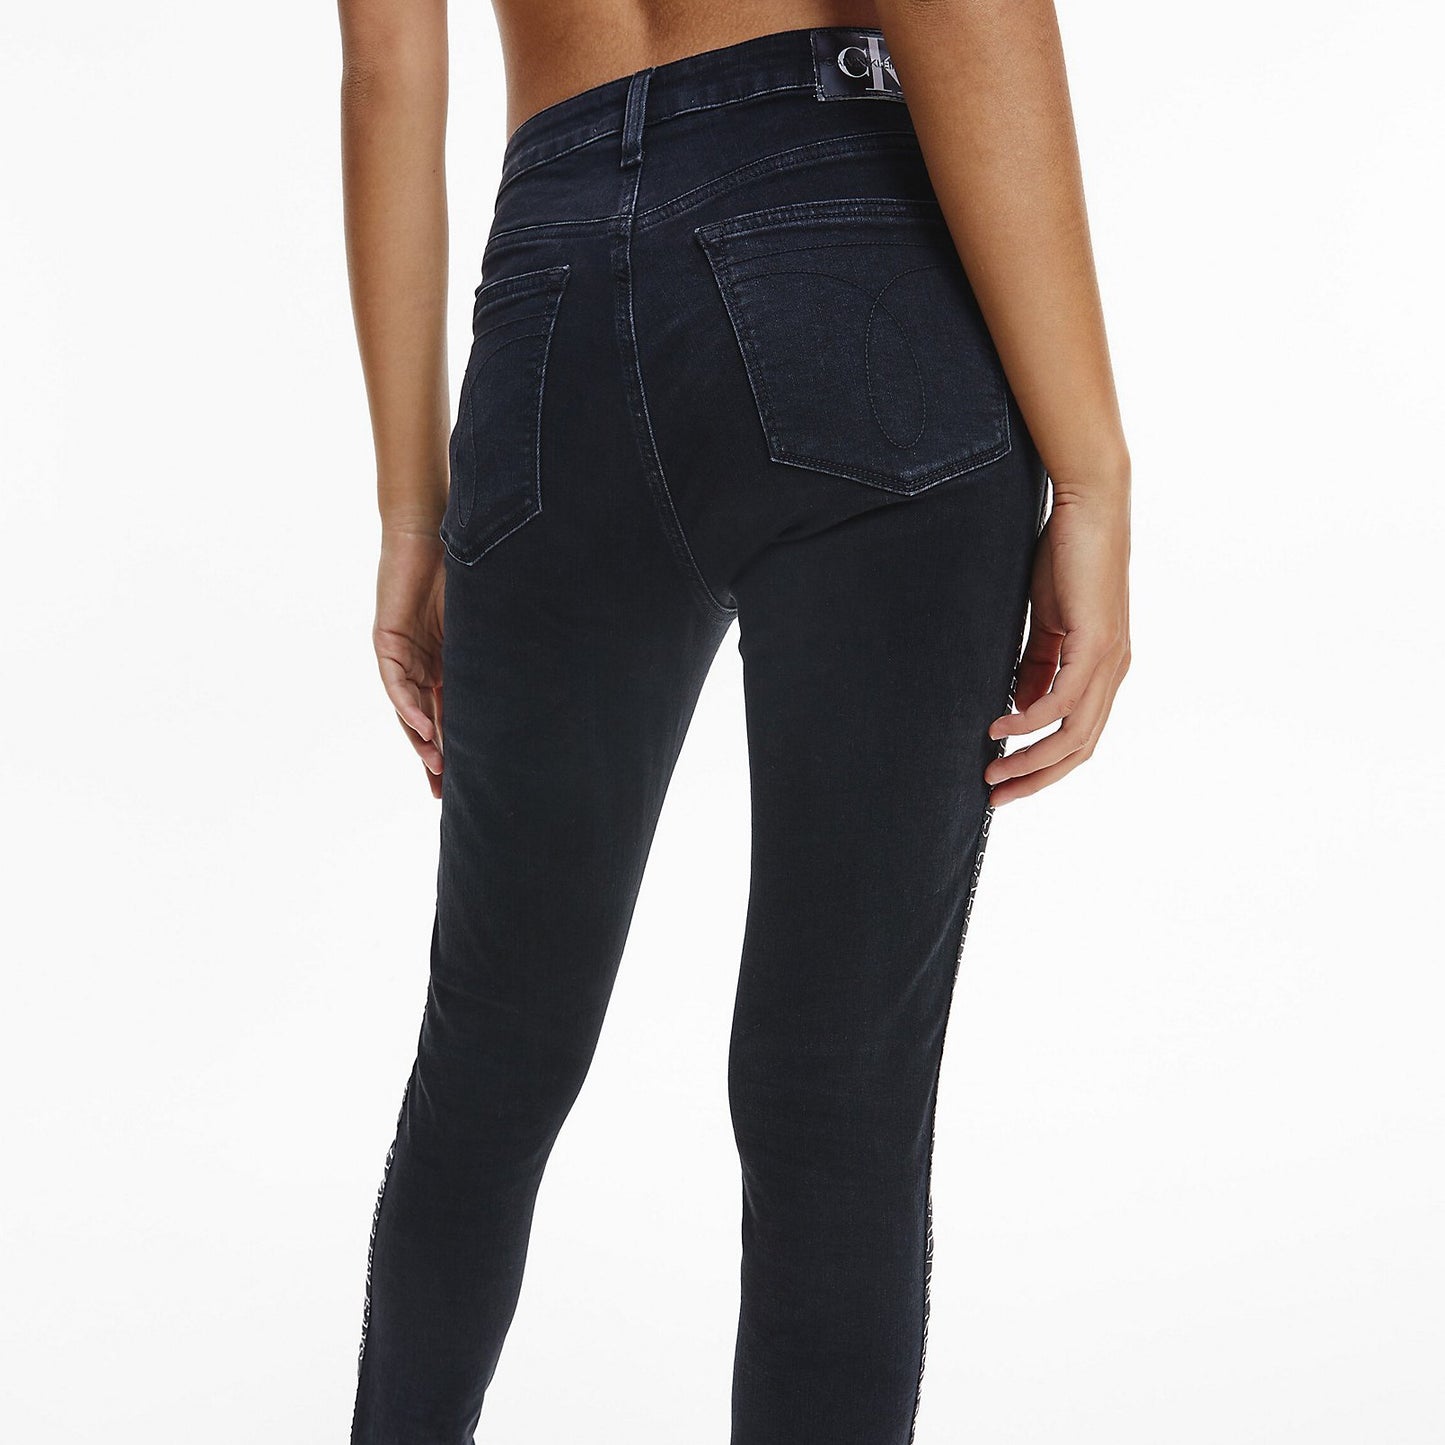 CALVIN KLEIN JEANS - JEANS HIGH RISE SKINNY JEANS DONNA